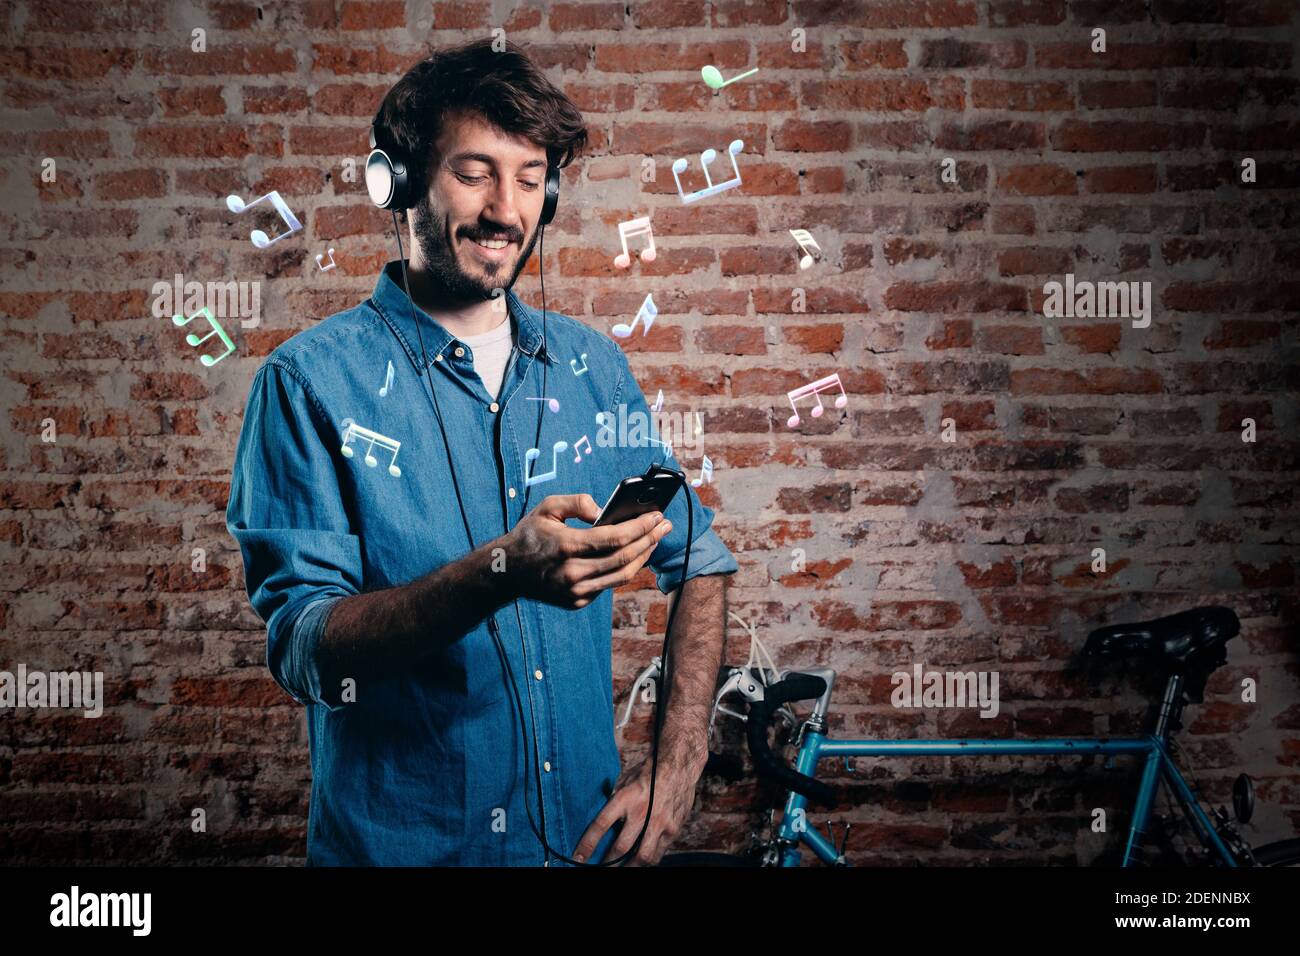 Young millennial listen to music with mobile phone and headphones. 3D Musical notes around him. Stock Photo